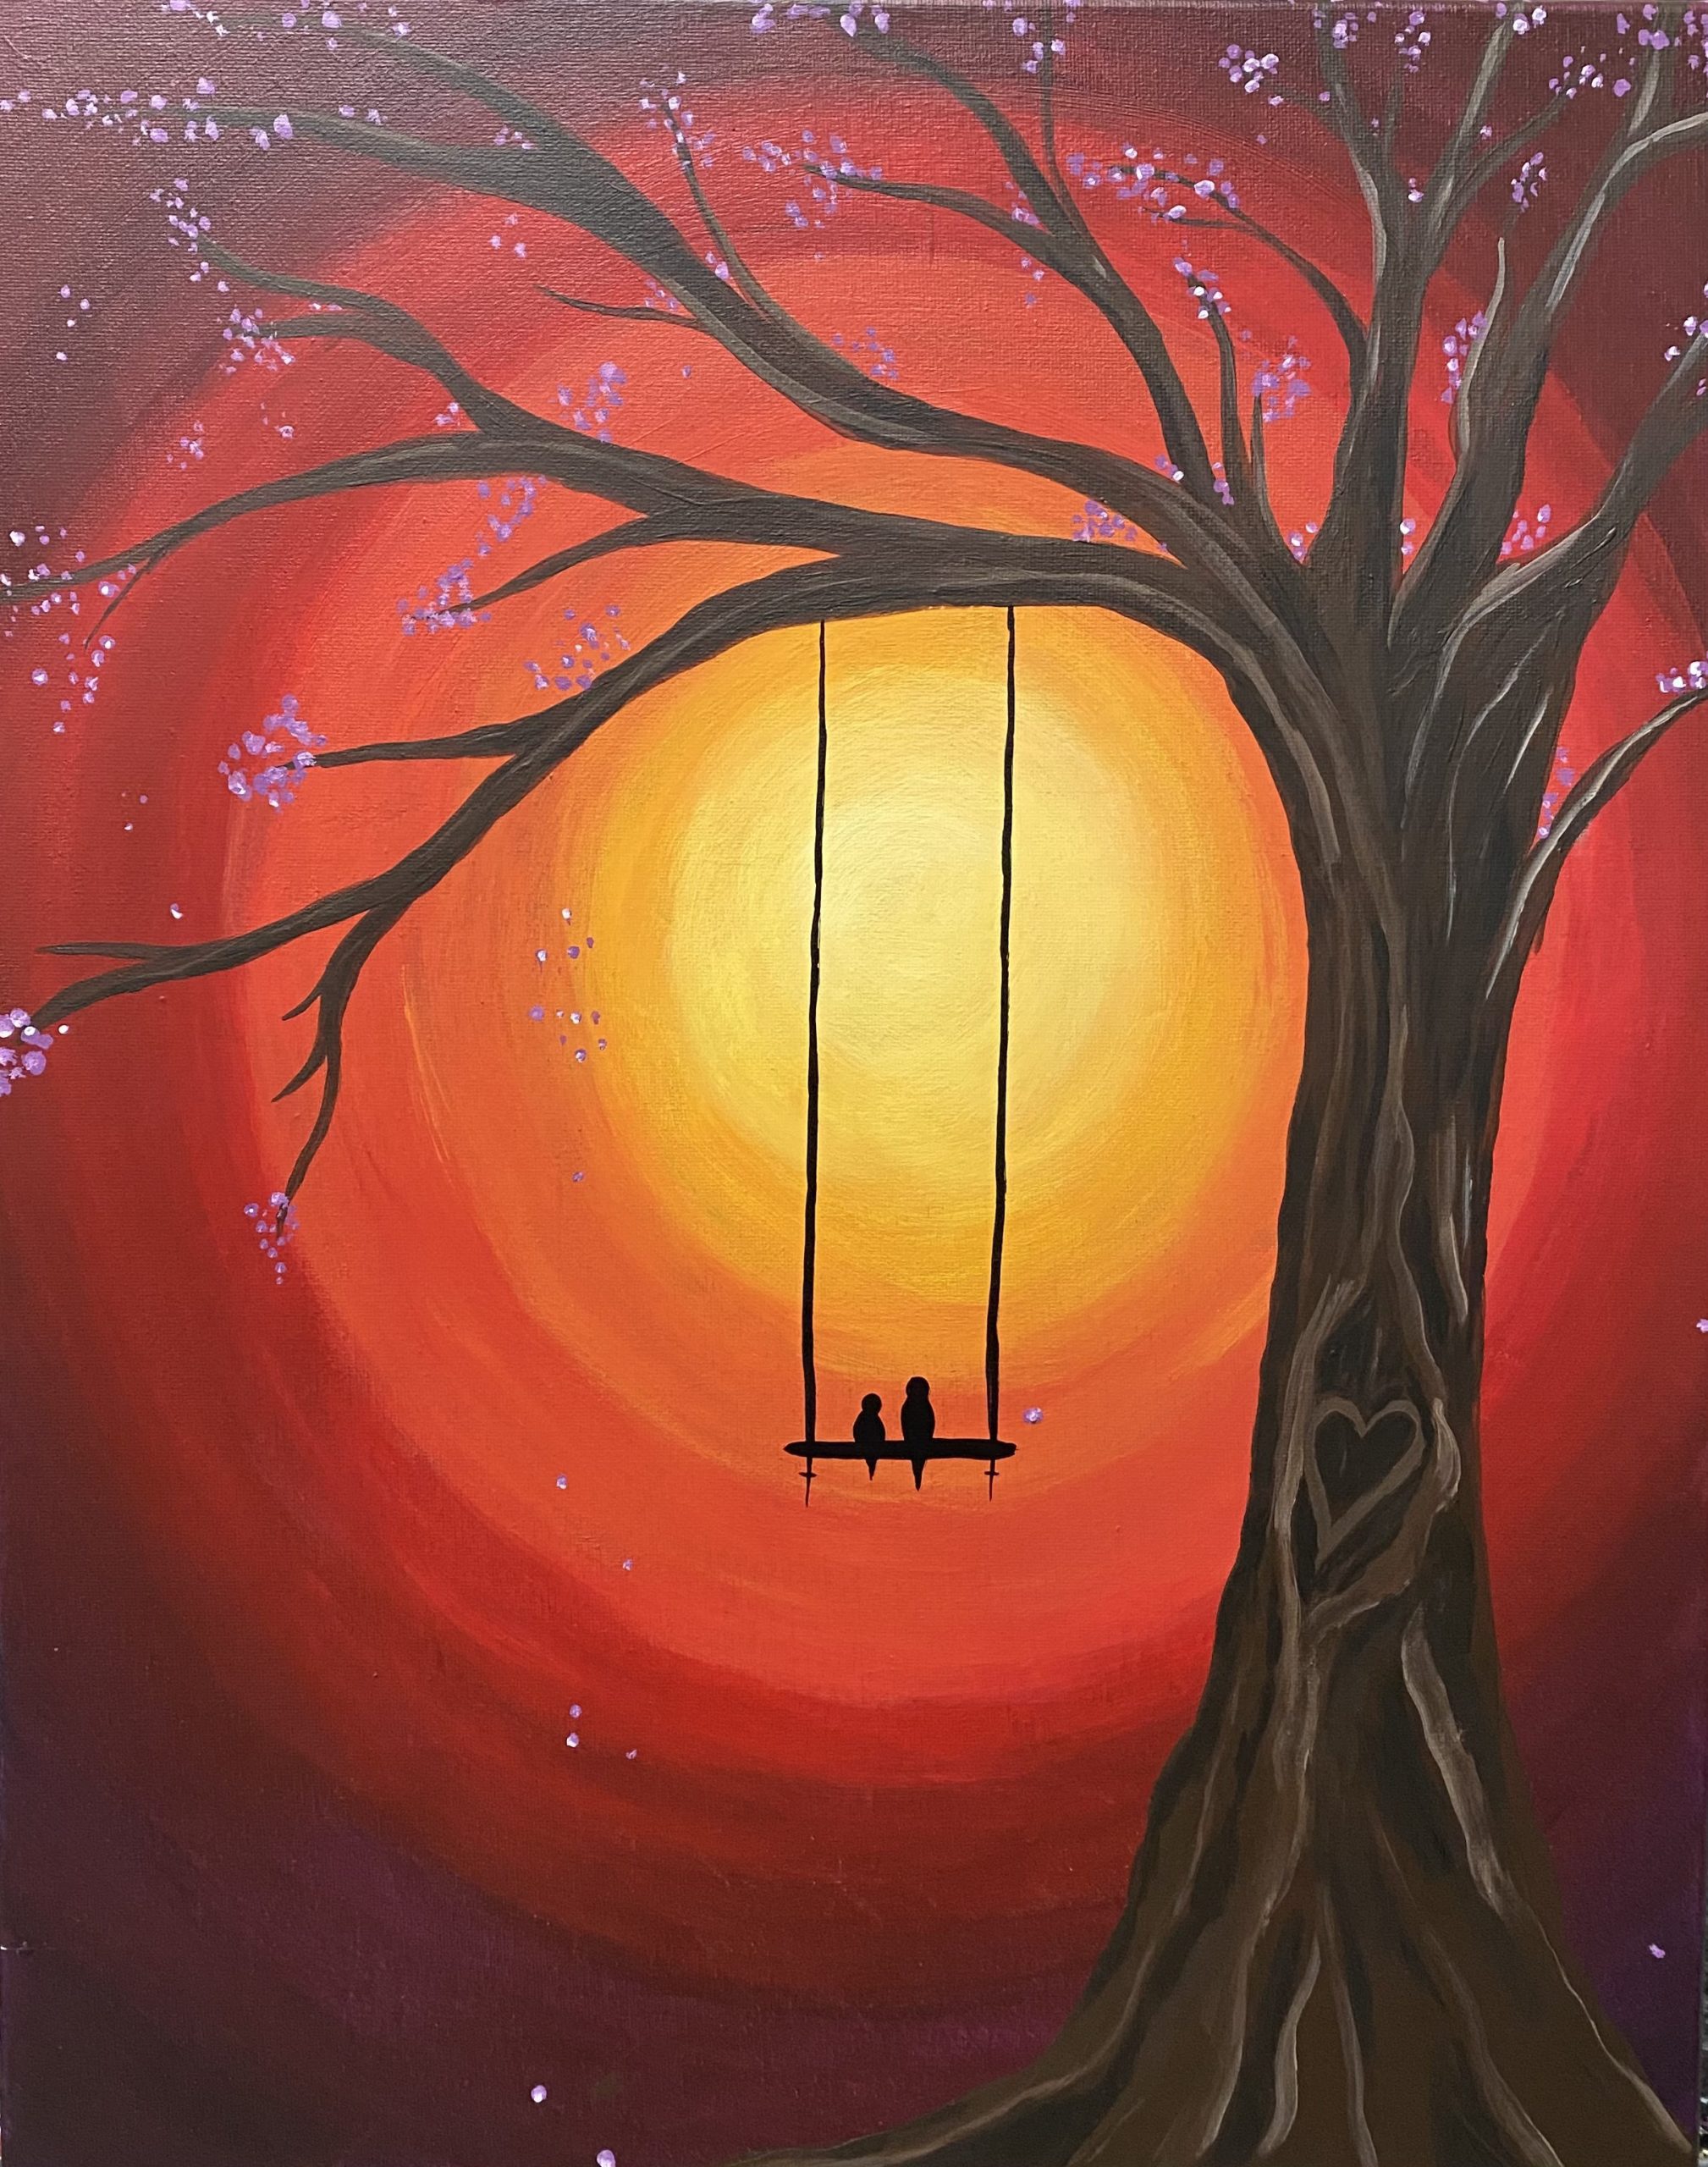 Image of painting called "Love birds on a swing" paint and sip painting event at Brick and Barrel in Lincoln